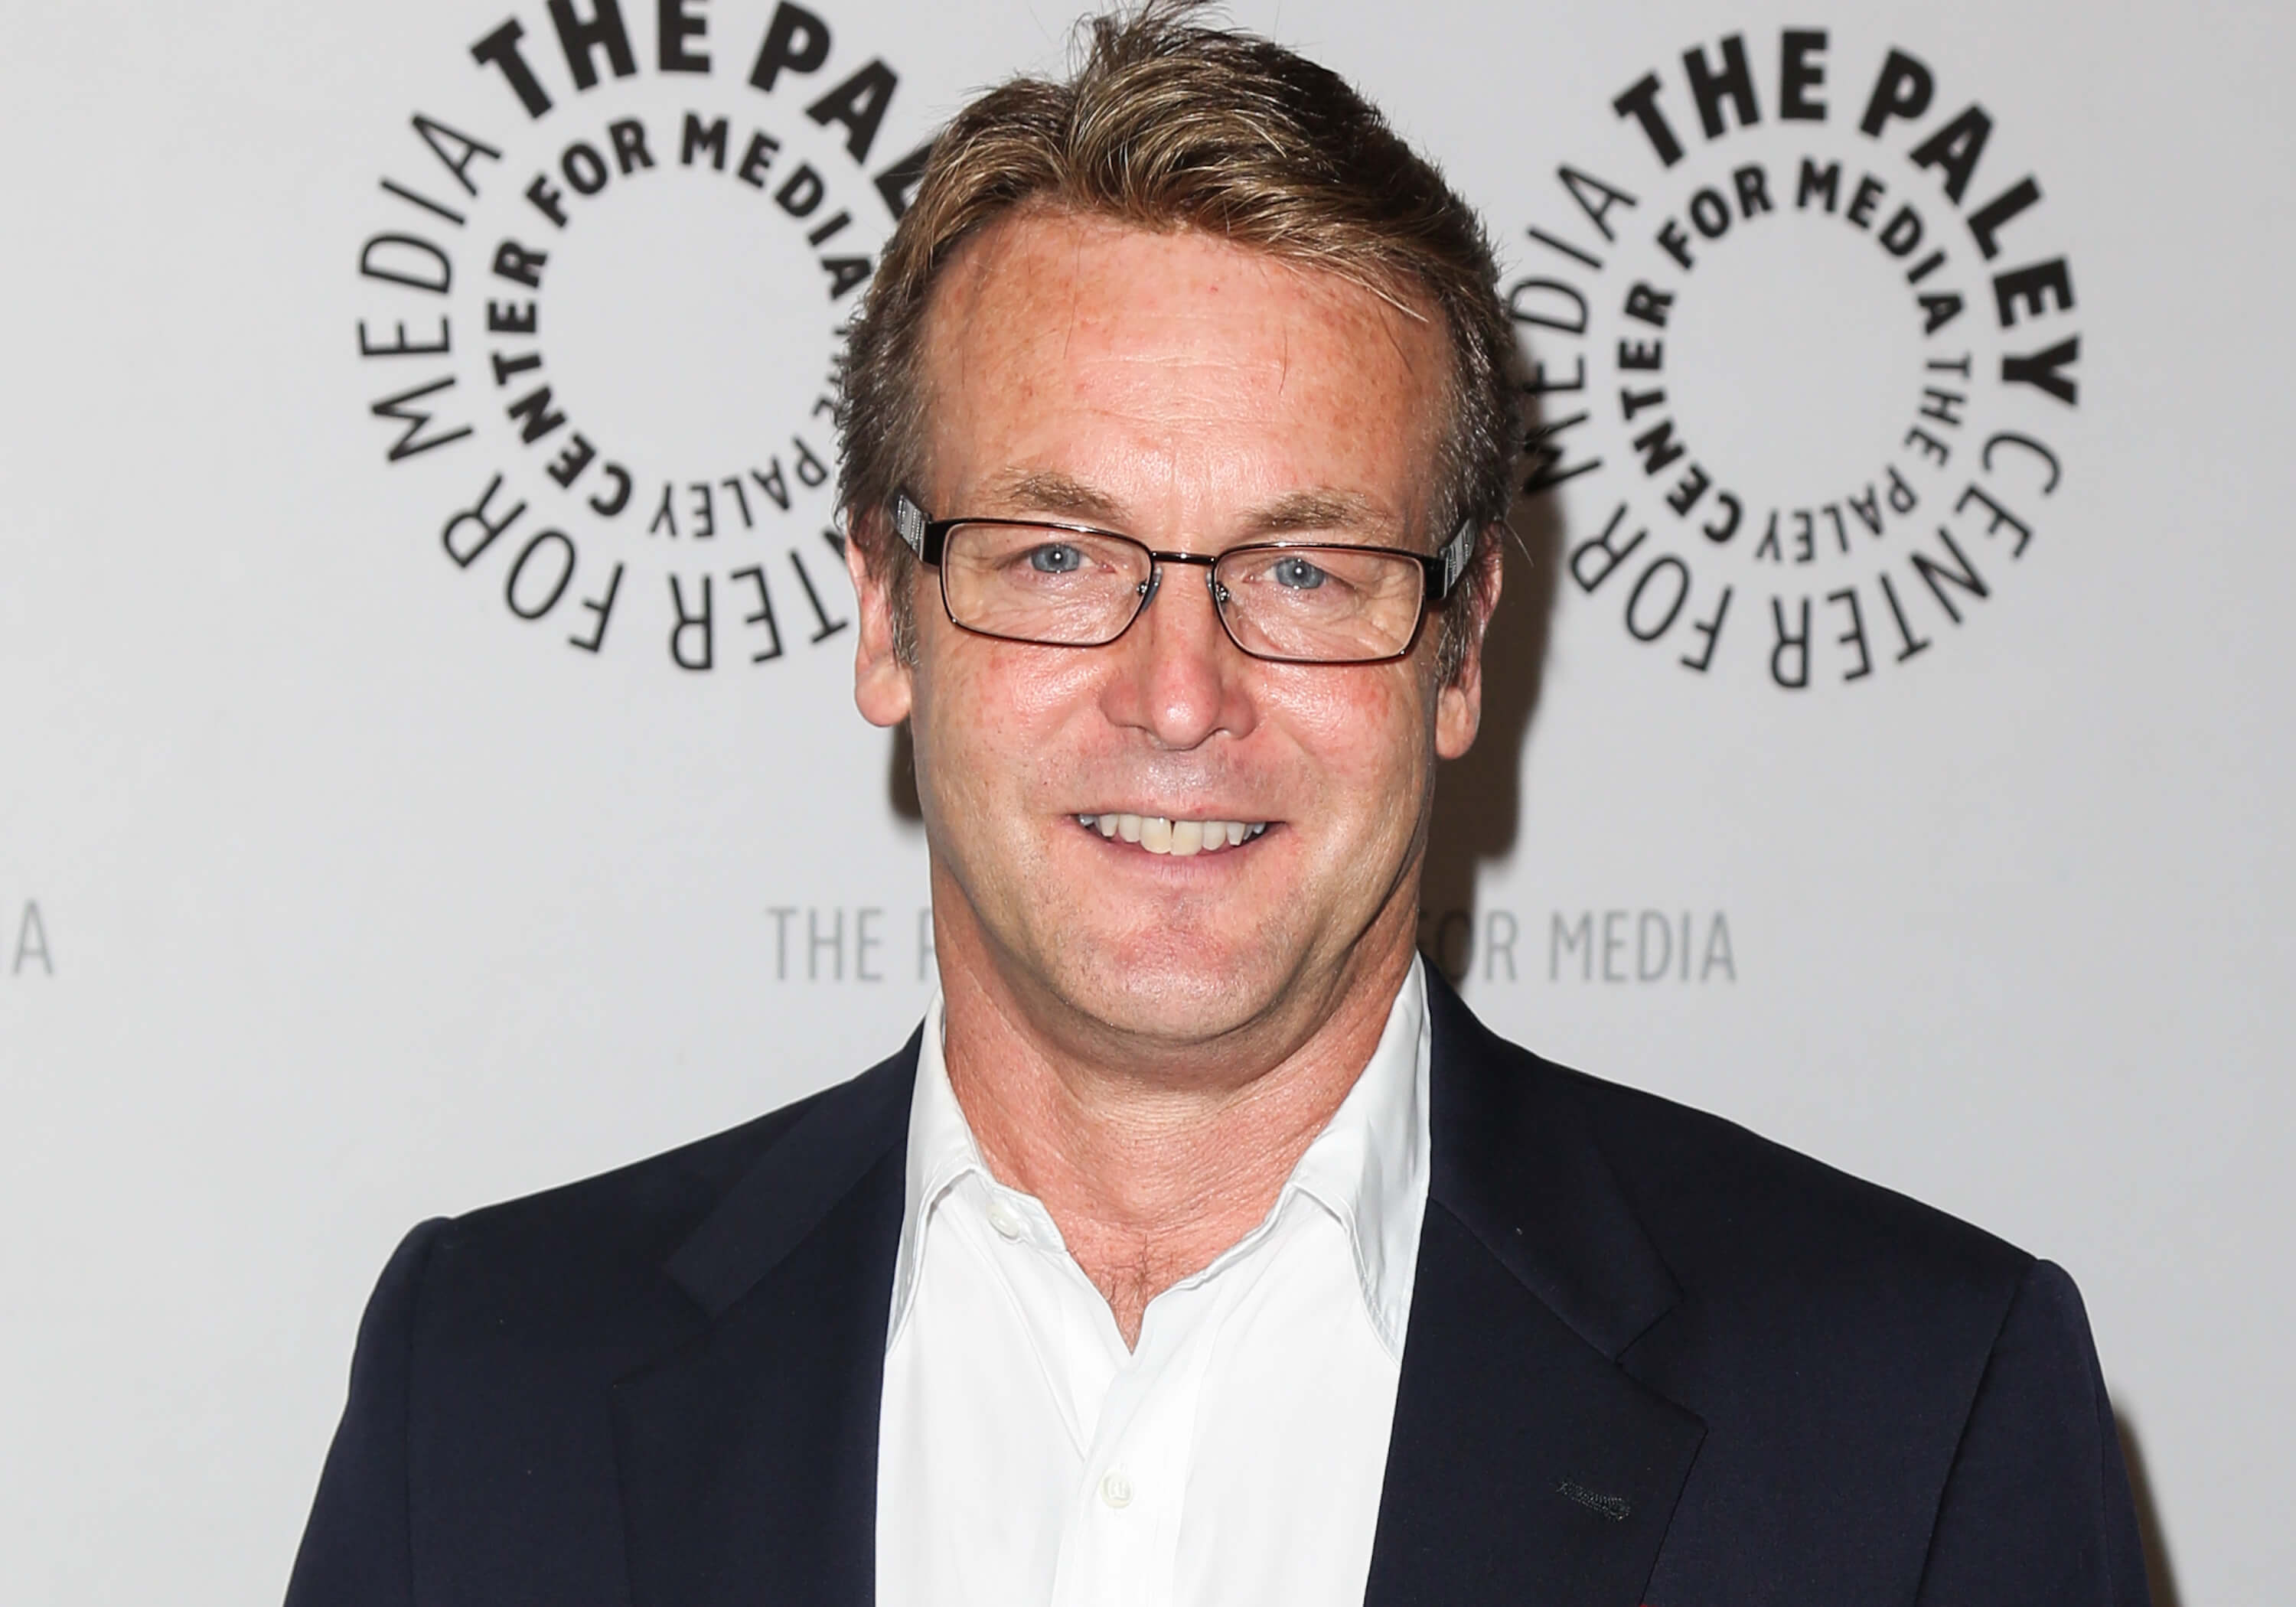 'The Young and the Restless' star Doug Davidson wearing a suit and glasses; smiles for a photo on the red carpet.